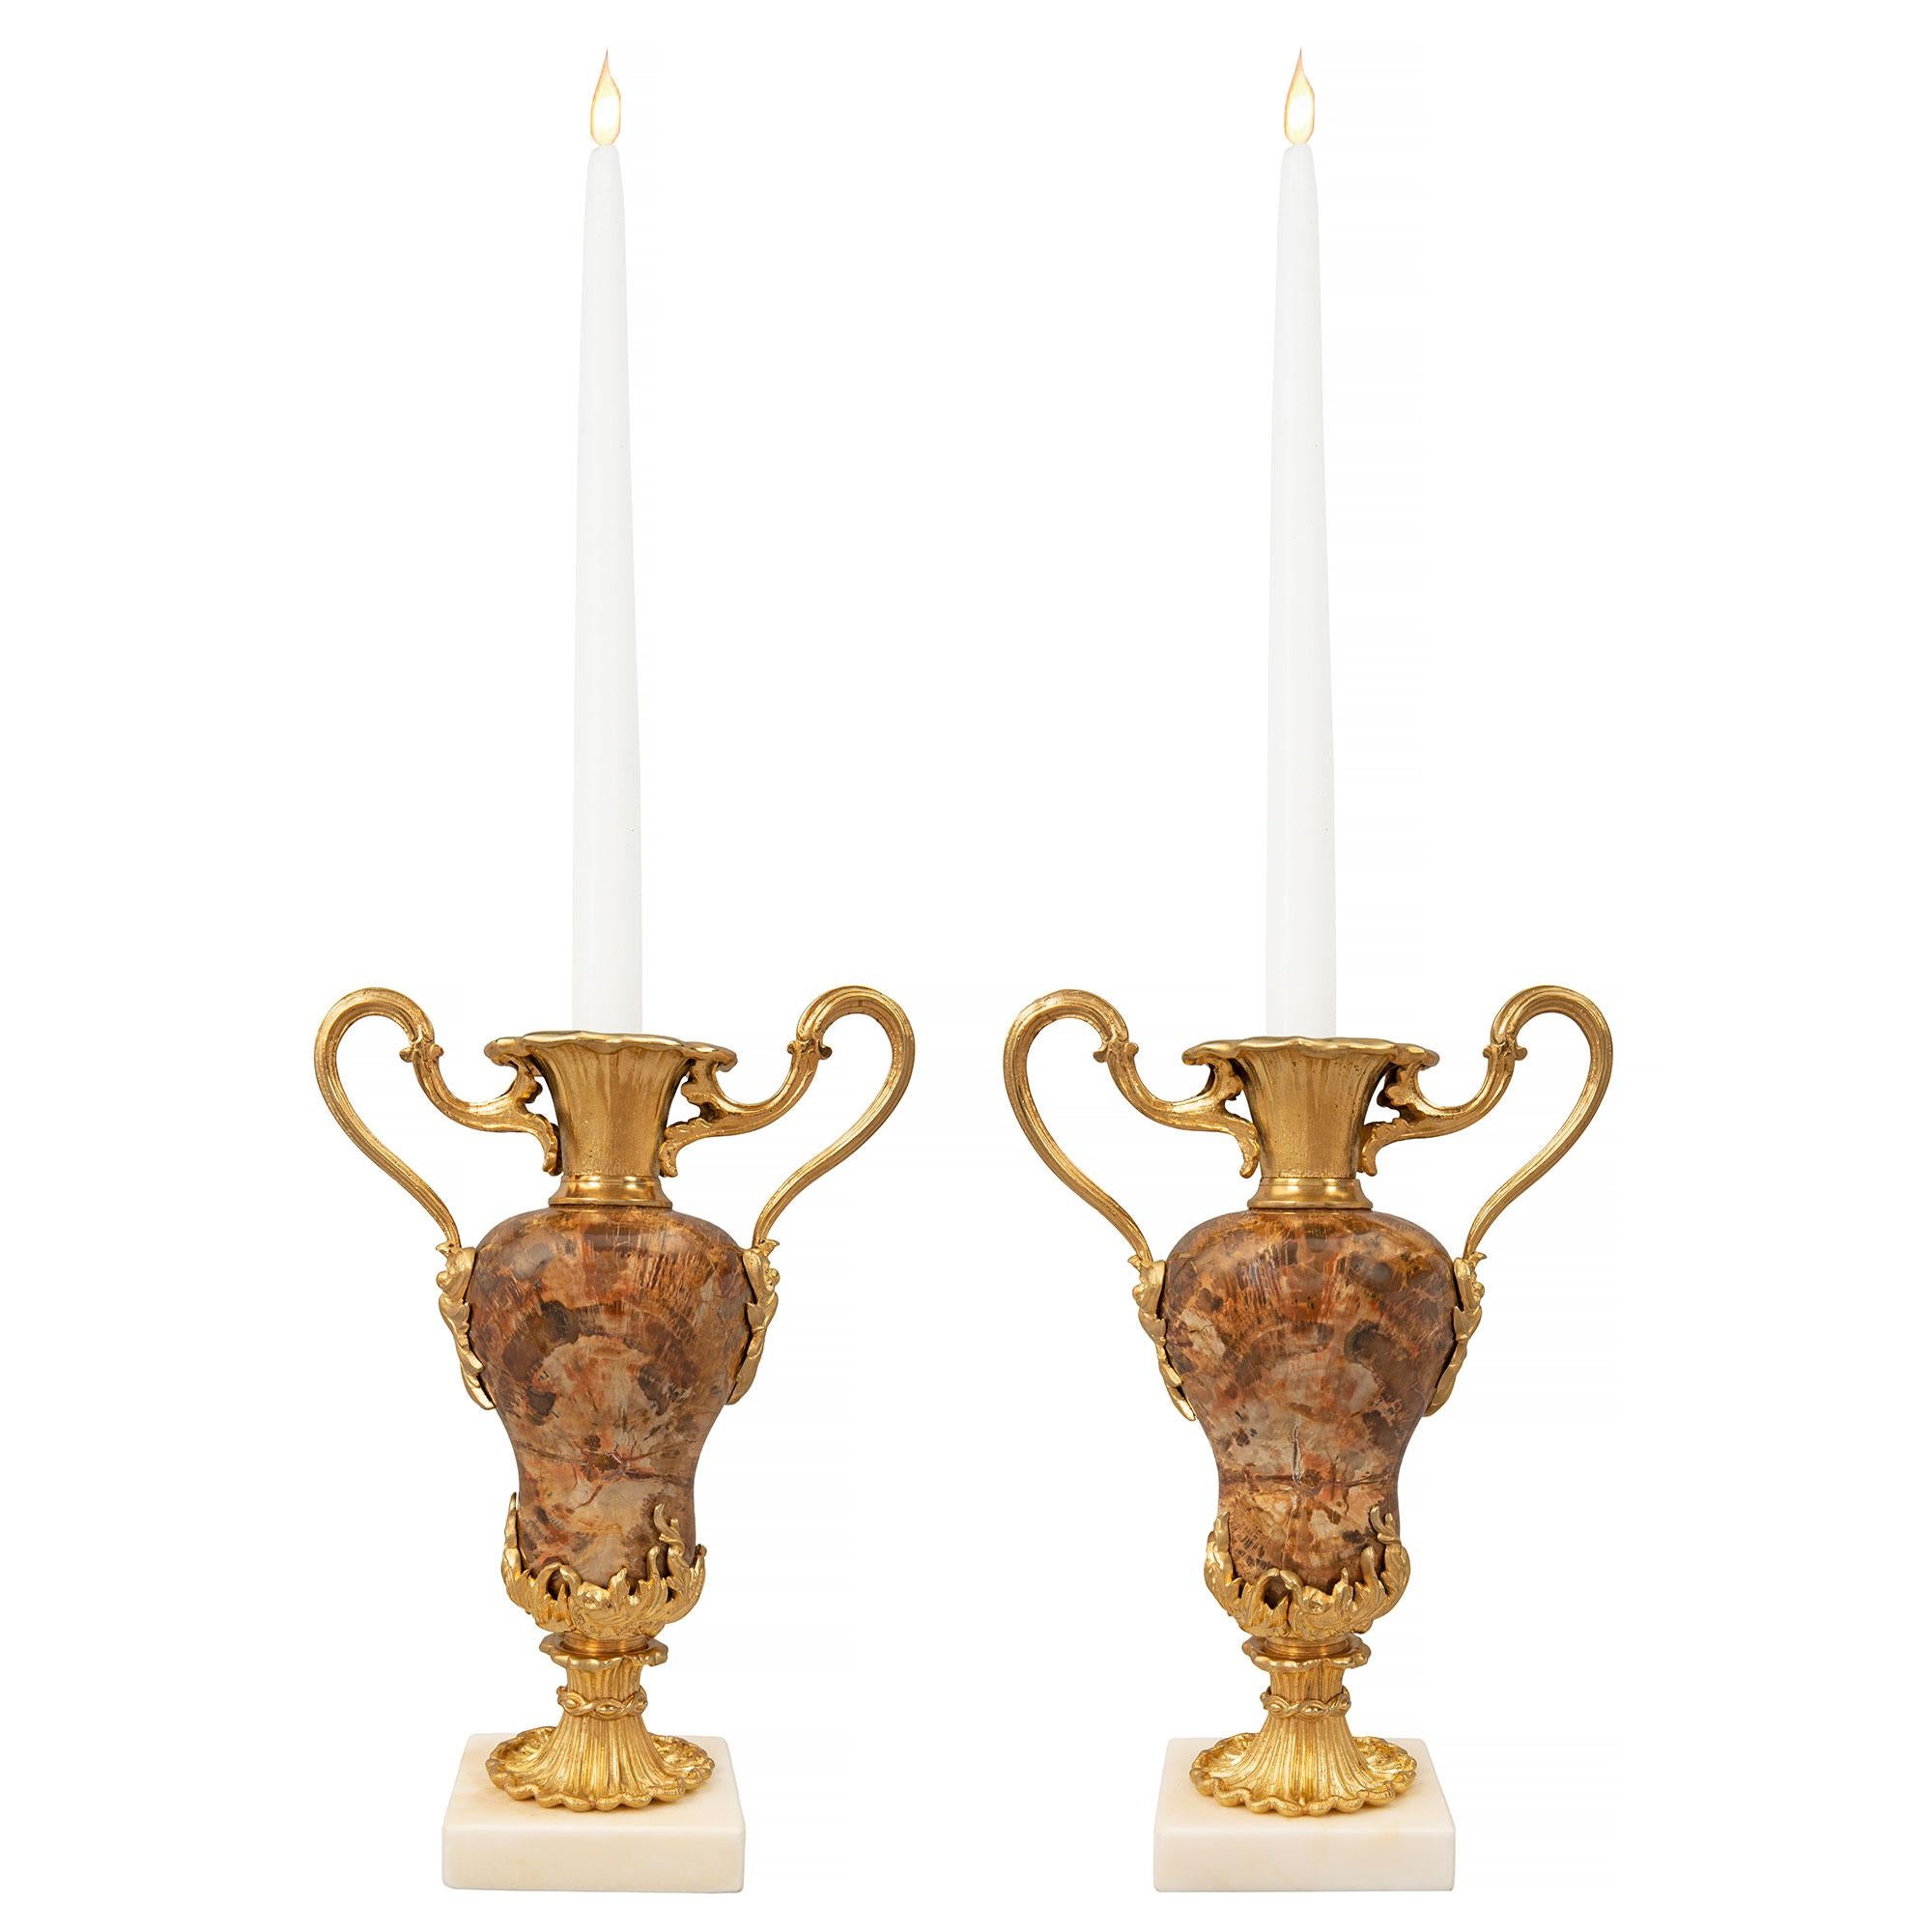 An exceptional and rare pair of Continental 19th century Louis XVI st. white Carrara marble, ormolu and petrified wood candlestick vases. Each vase is raised by a square white Carrara marble base and a lovely ormolu socle pedestal with an elegant